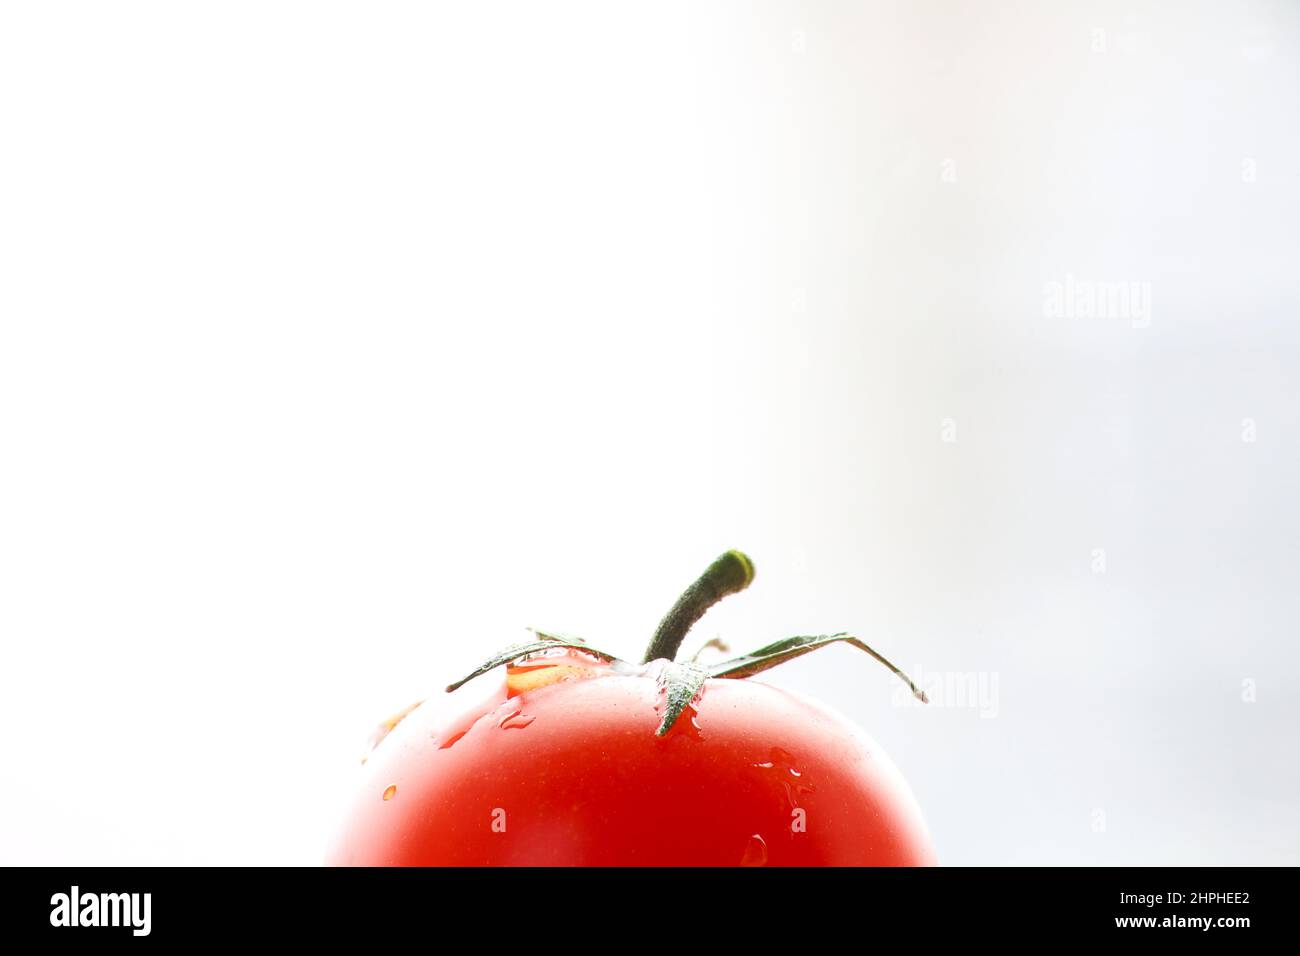 Fresh ripened red tomato in front of bright blurred background. Side view. Stock Photo